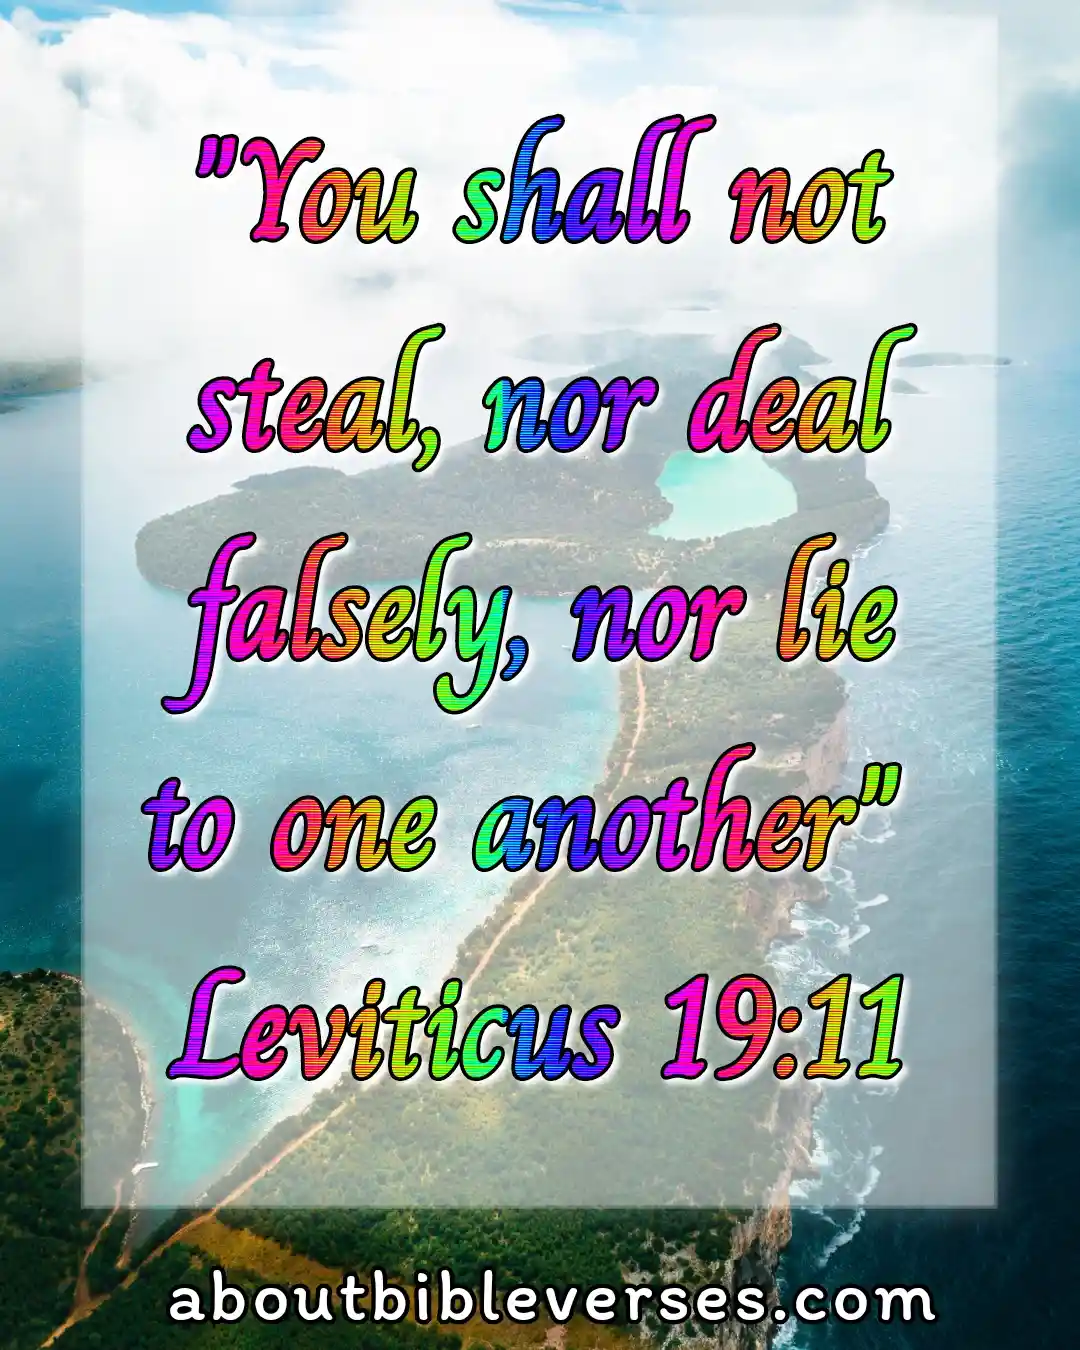 today bible verse (Leviticus 19:11)